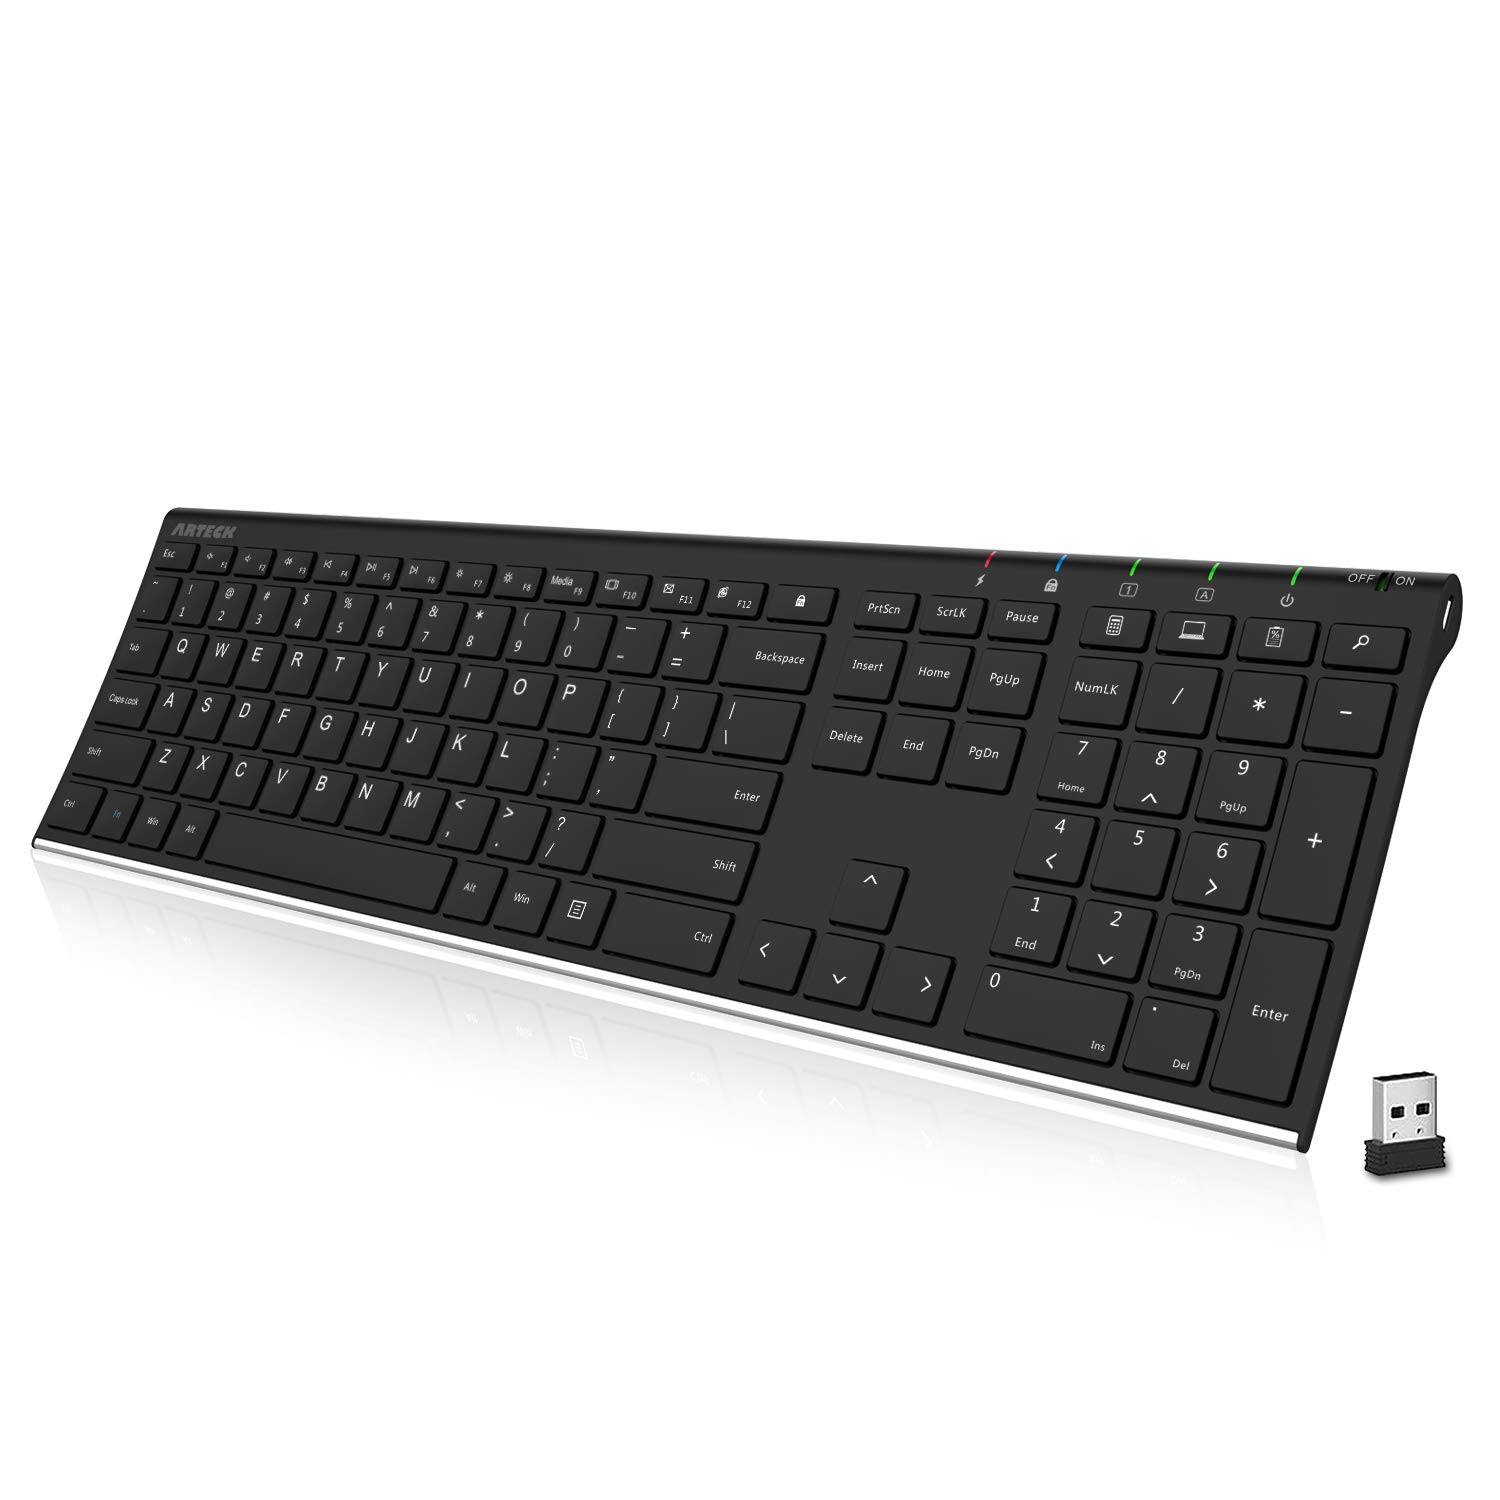 Arteck 2.4G Wireless Keyboard Stainless Steel Ultra Slim Full Size Keyboard  with Numeric Keypad for Computer/Desktop/ PC/Lap